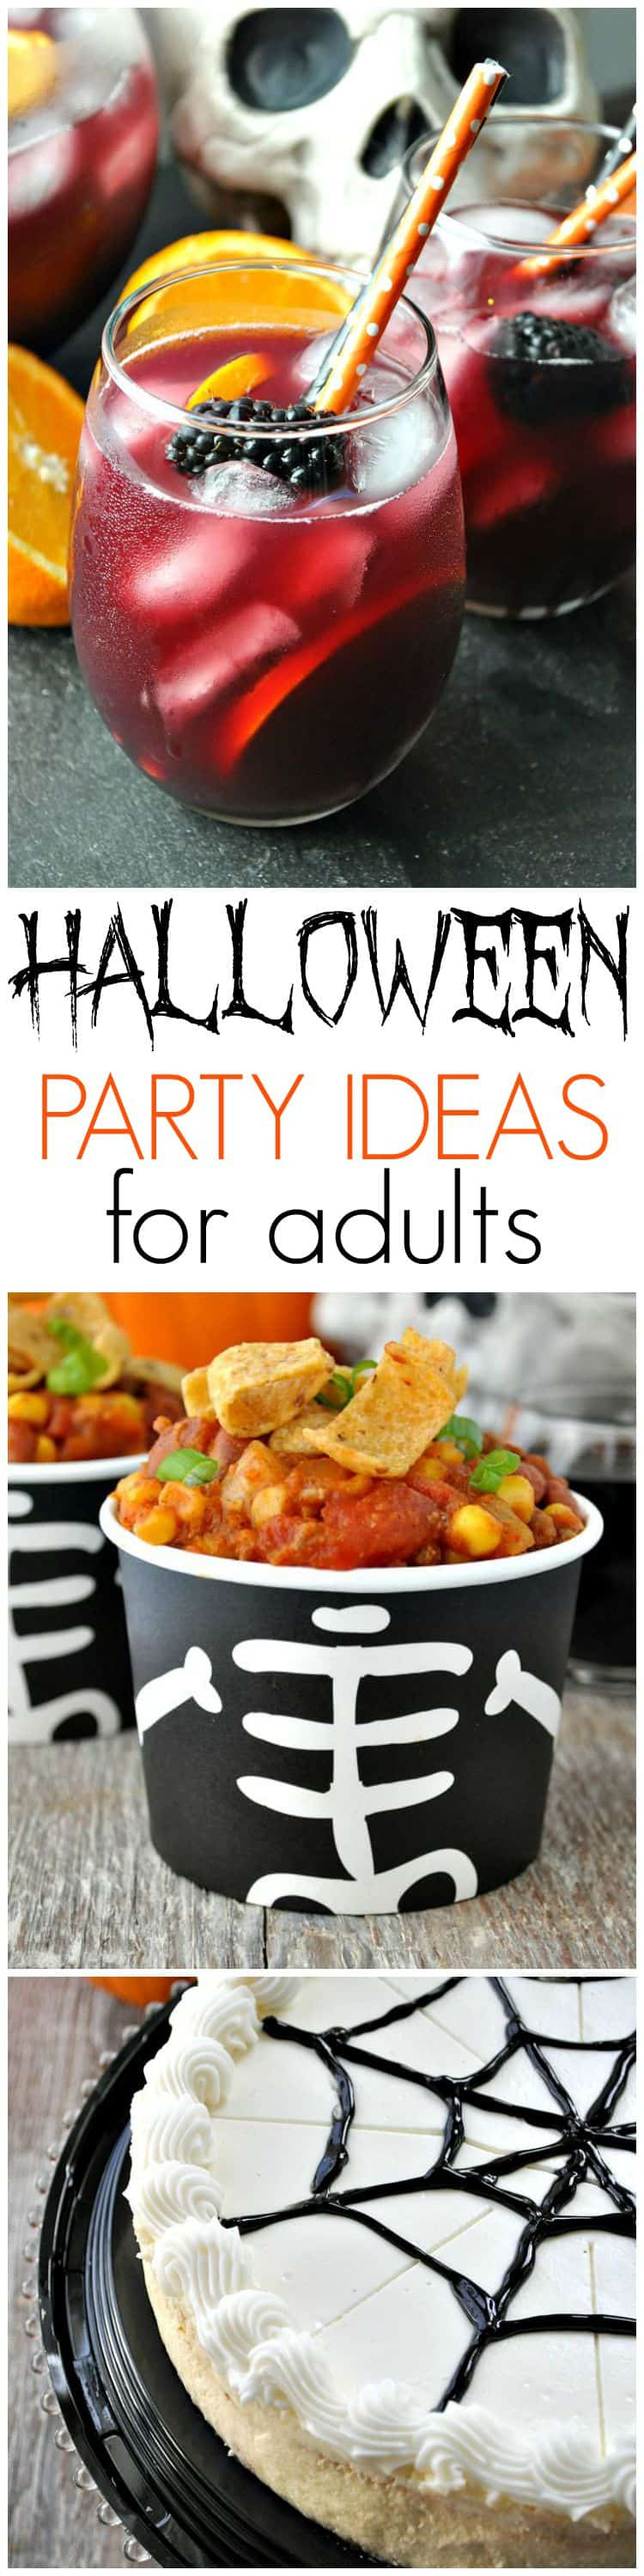 Adult Halloween Party Ideas
 Slow Cooker Pumpkin Chili Halloween Party Ideas for